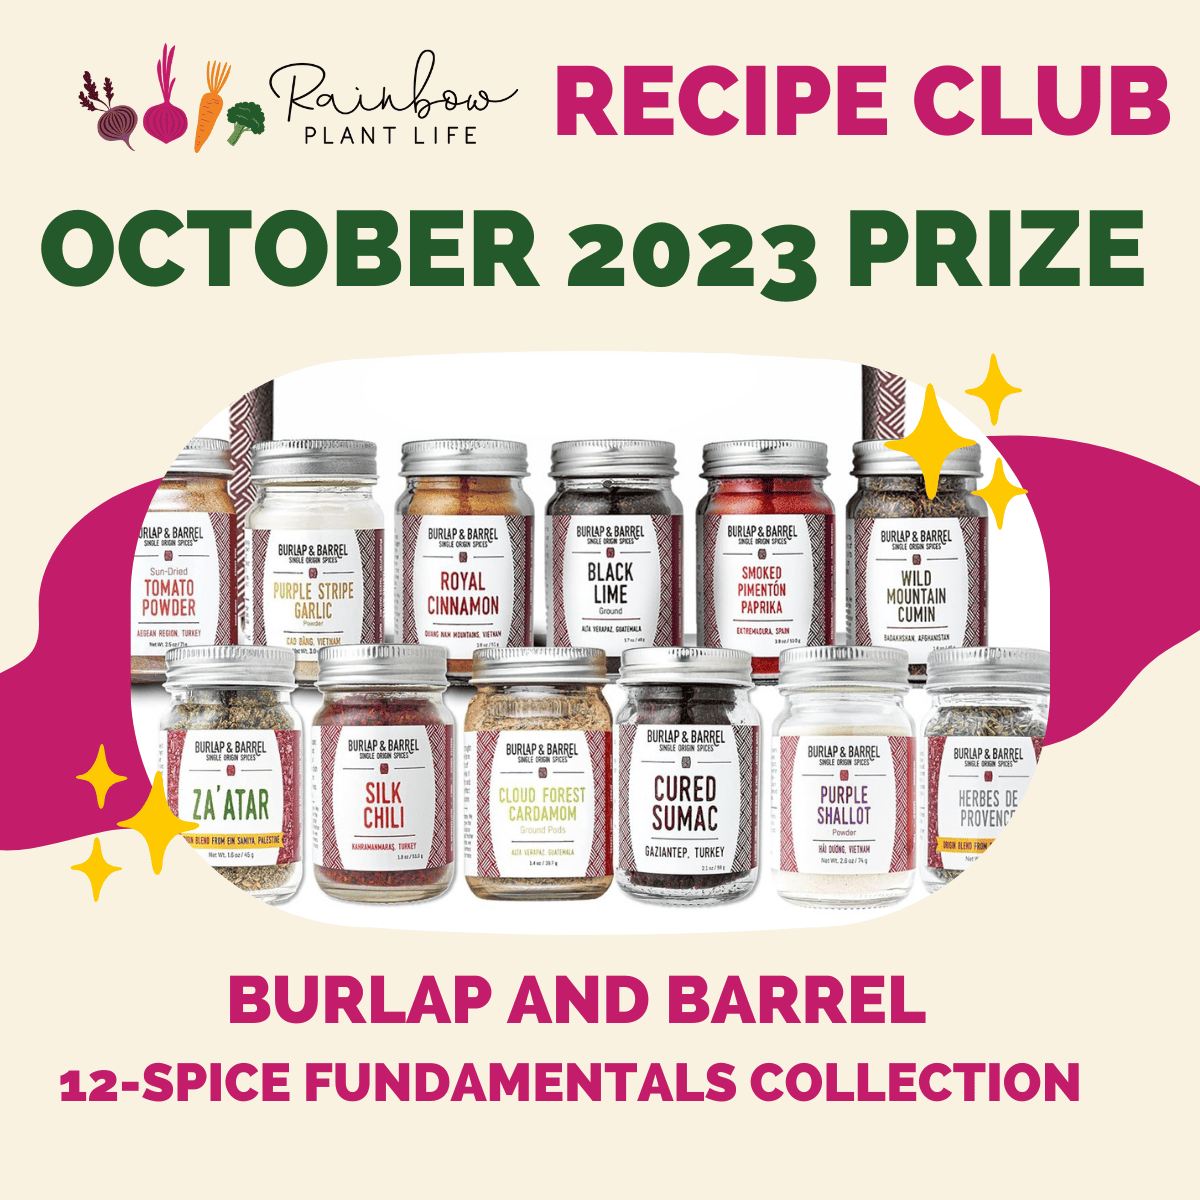 Burlap and barrel 12-spice gift set giveaway graphic.